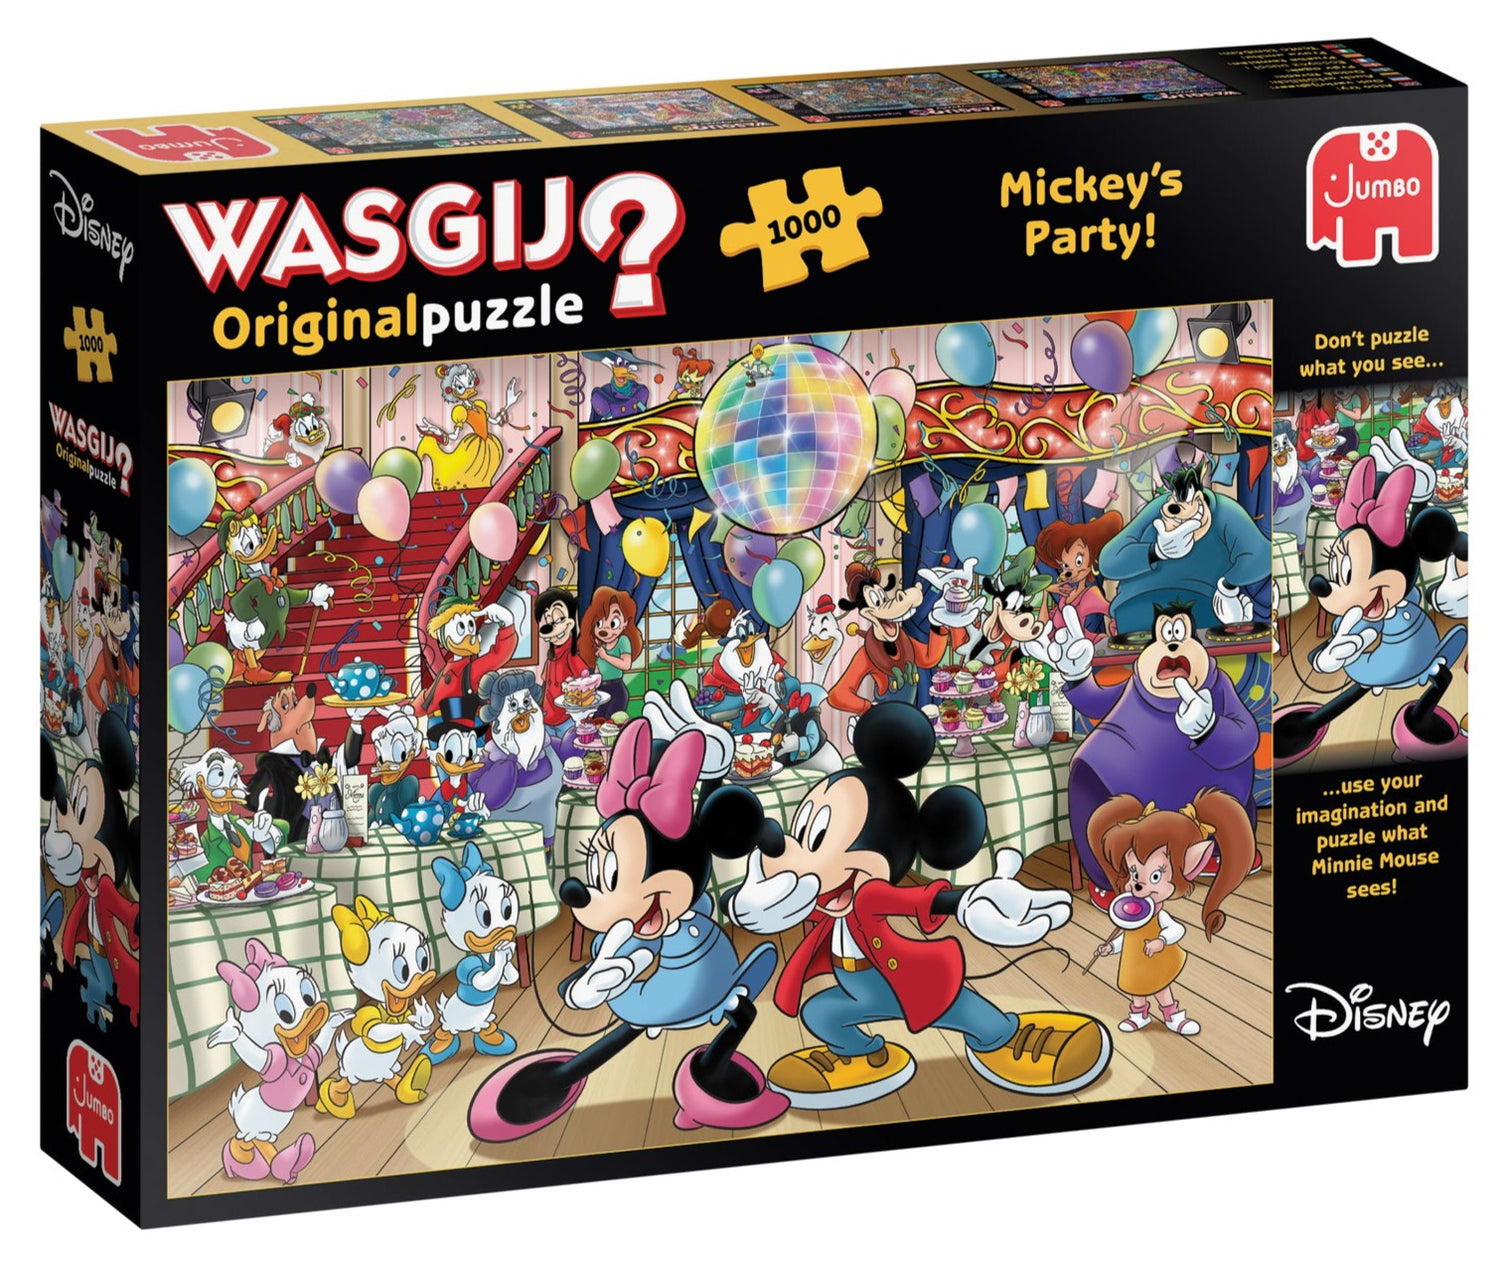 Just Arrived - New Jigsaw Puzzles